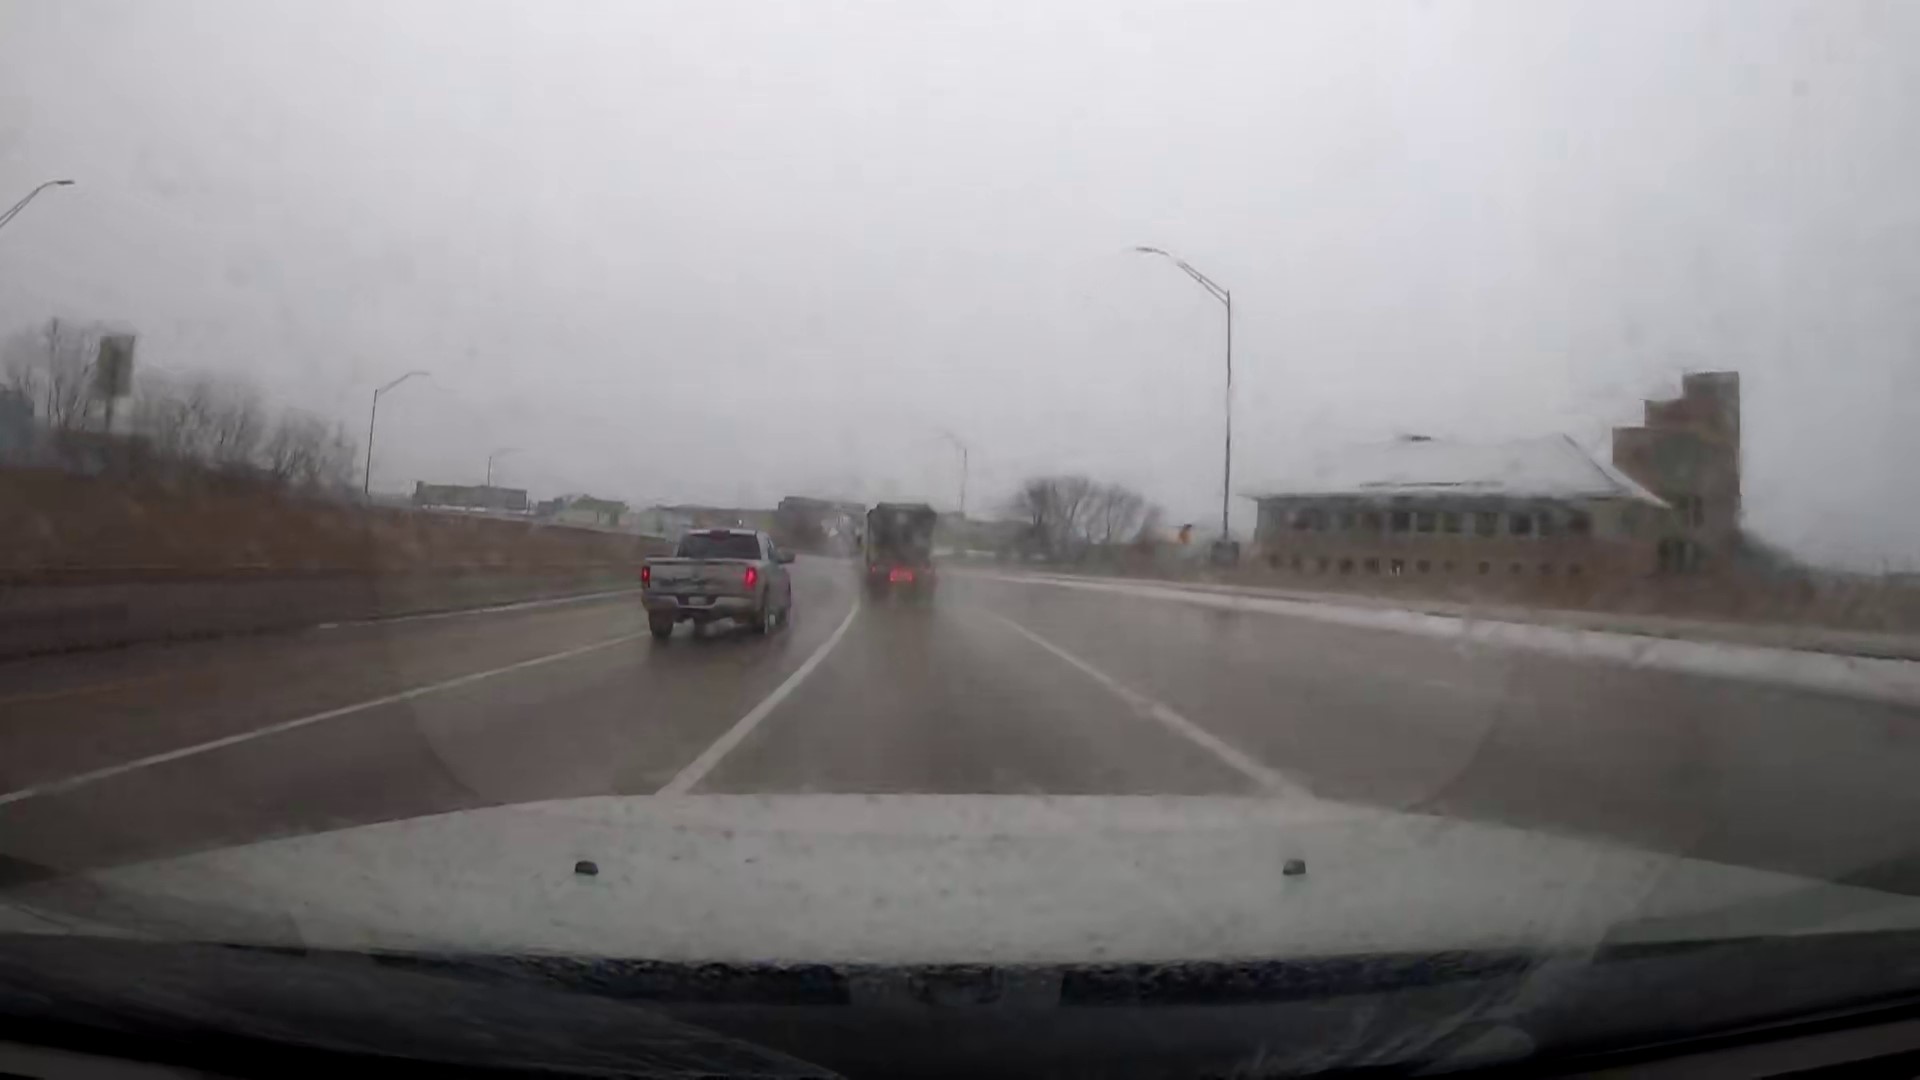 13 ON YOUR SIDE is tracking the latest conditions on the roads tonight around the Grand Rapids area.